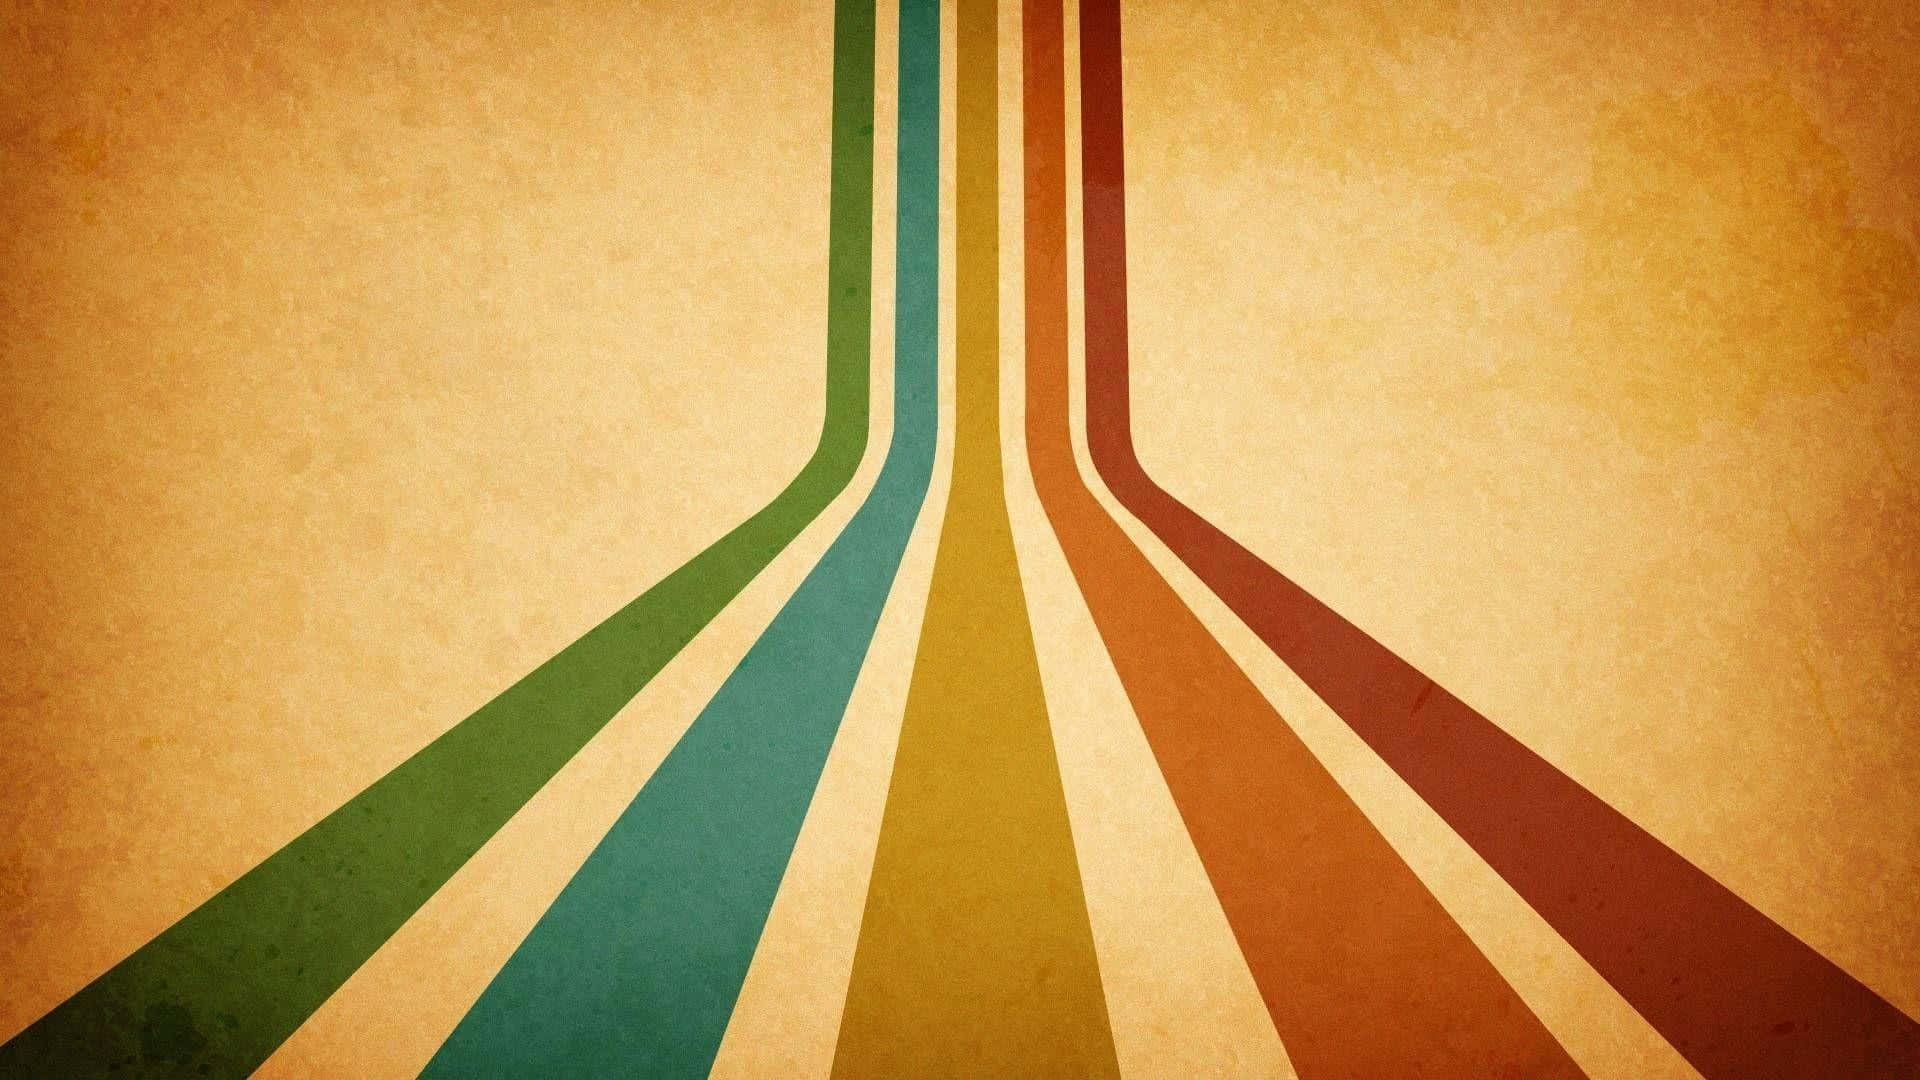 A Colorful Retro Background With A Rainbow Of Stripes